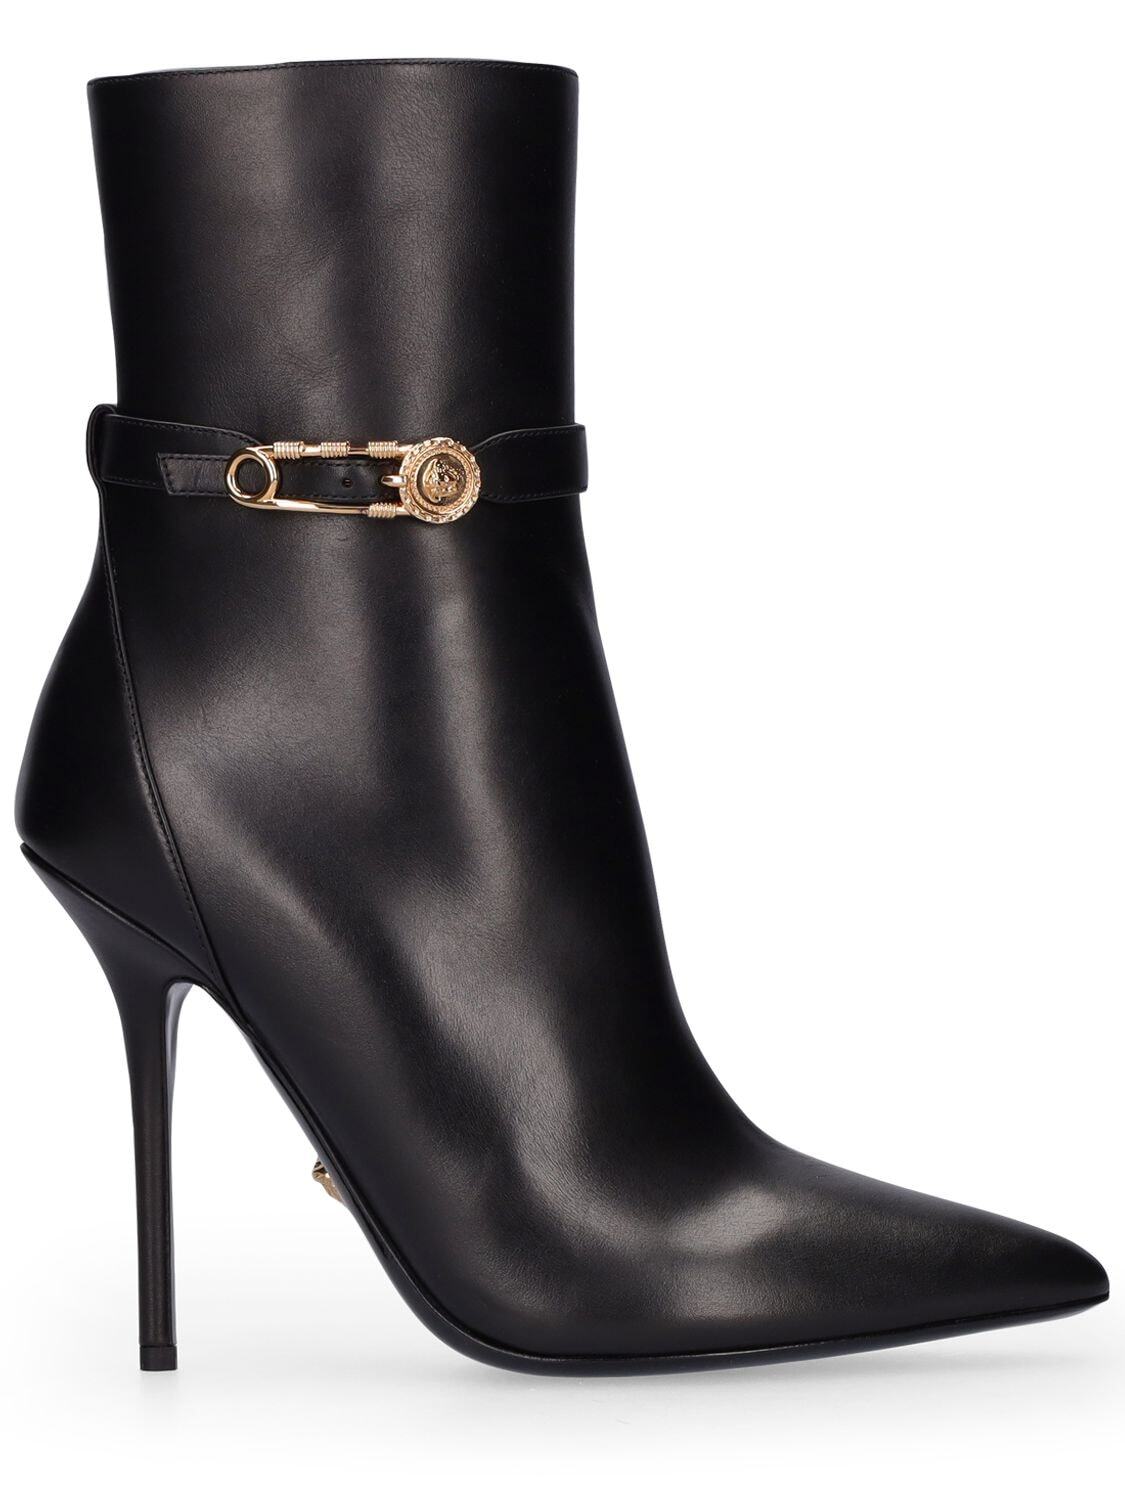 VERSACE 110mm Leather Ankle Boots in black